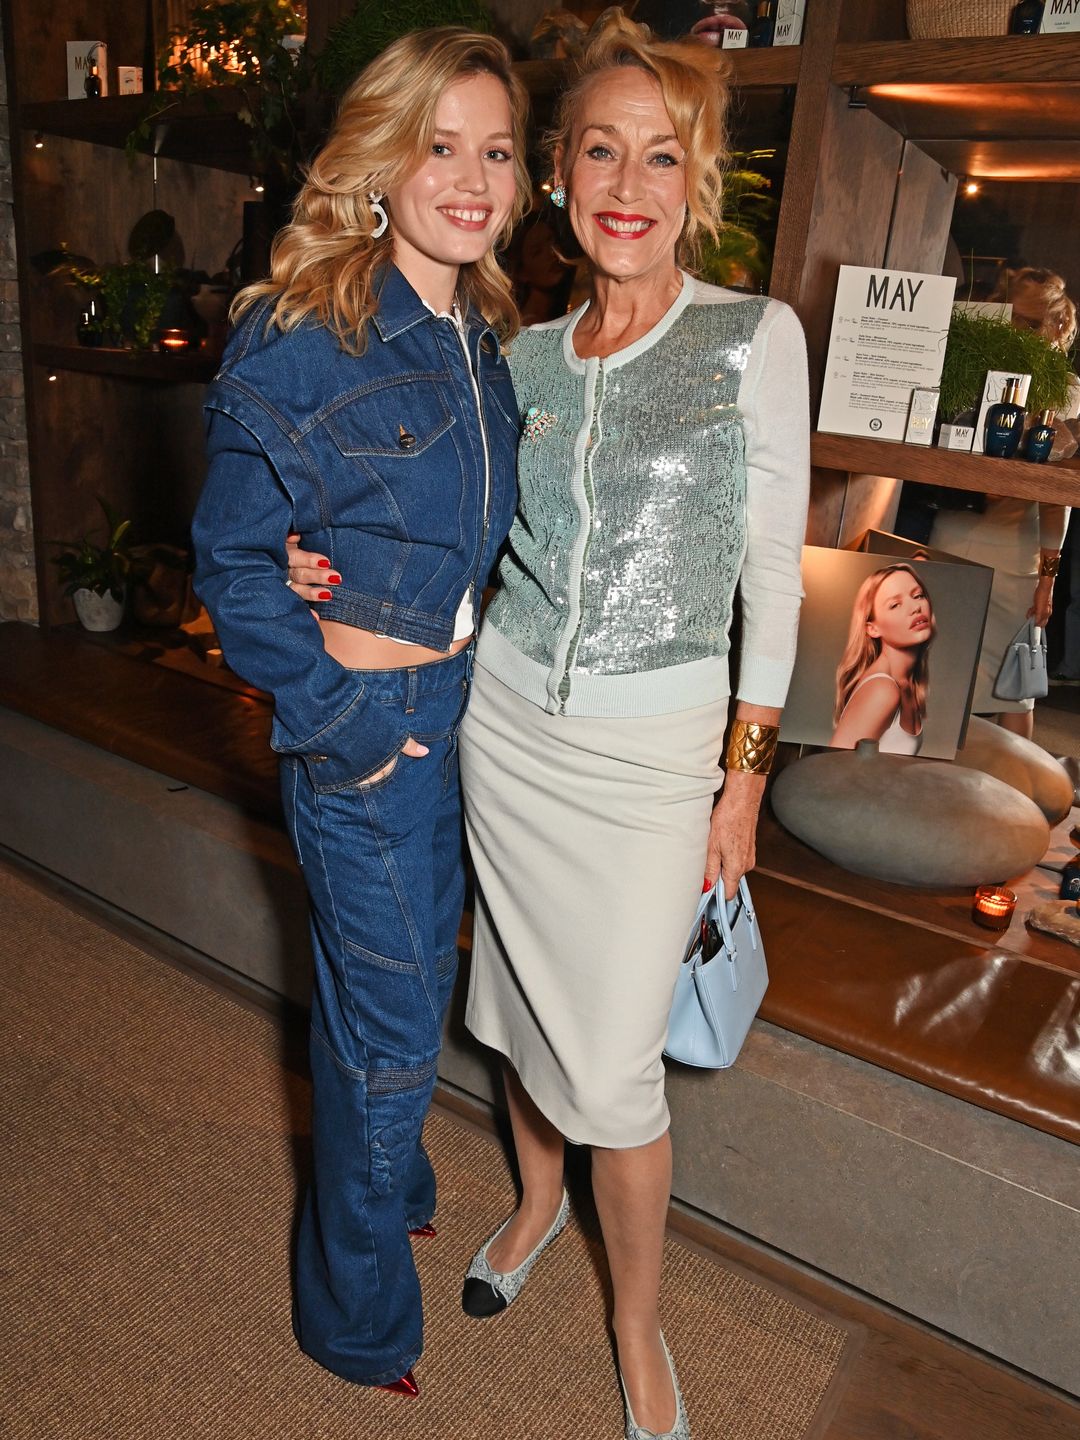 Georgia May Jagger and her mother Jerry Hall at May Botanicals' launch event 